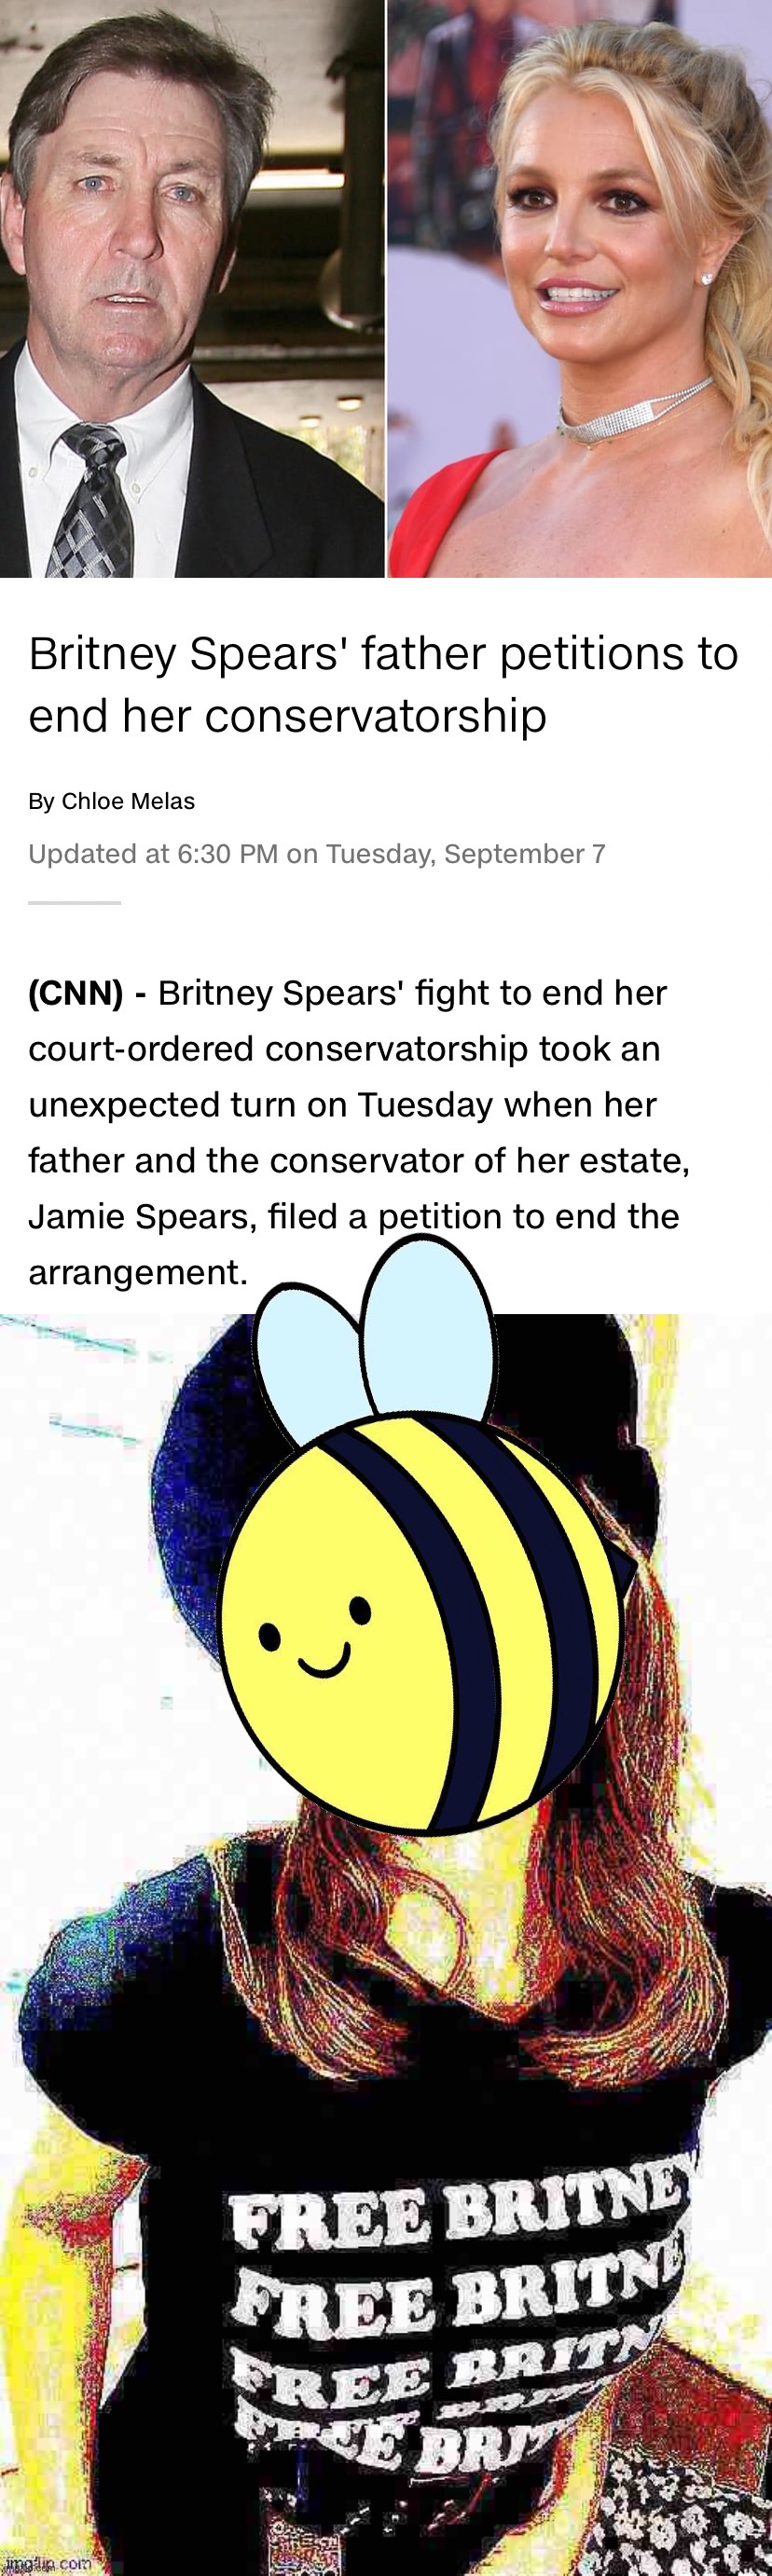 Well boys, we did it. While no one was looking, we freed Britney Spears. [Wholesome PRESIDENTS content] | image tagged in britney freed,free britney,britney spears,leave britney alone,wholesome presidents content,beez | made w/ Imgflip meme maker